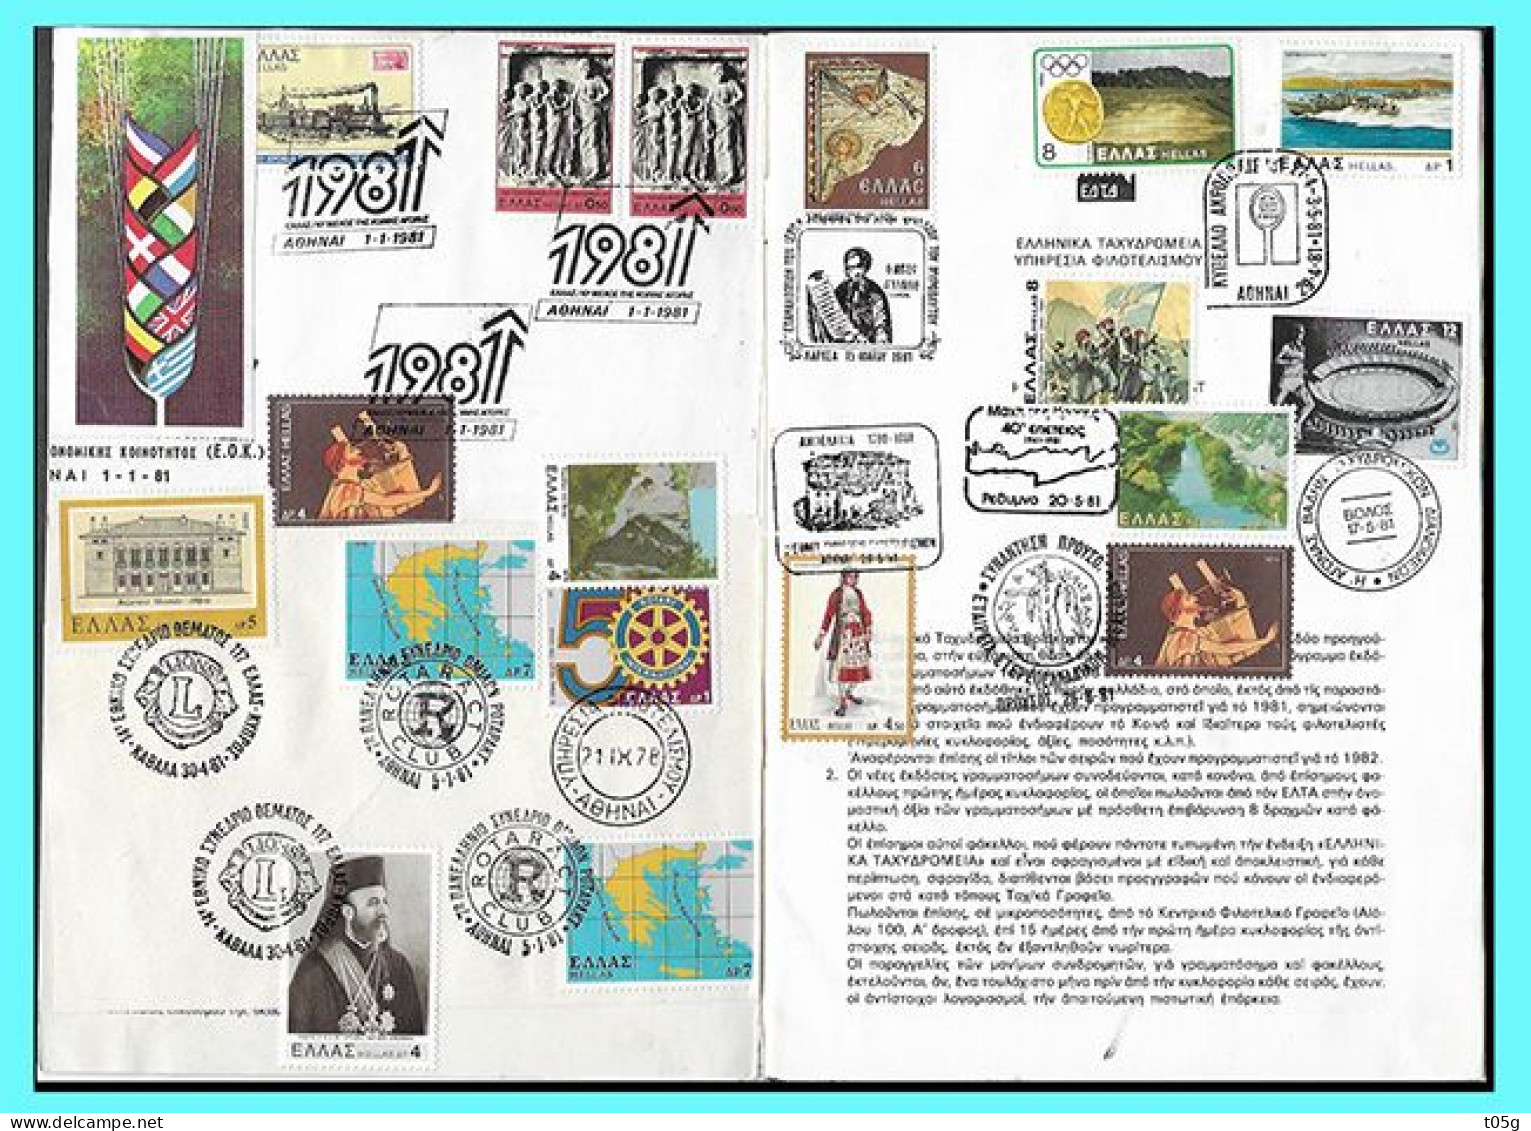 GREECE- GRECE - HELLAS 1981: Booklet With Compl. Set And Commemorative Postmark - For Year 1981 (5SCANS) - Usati